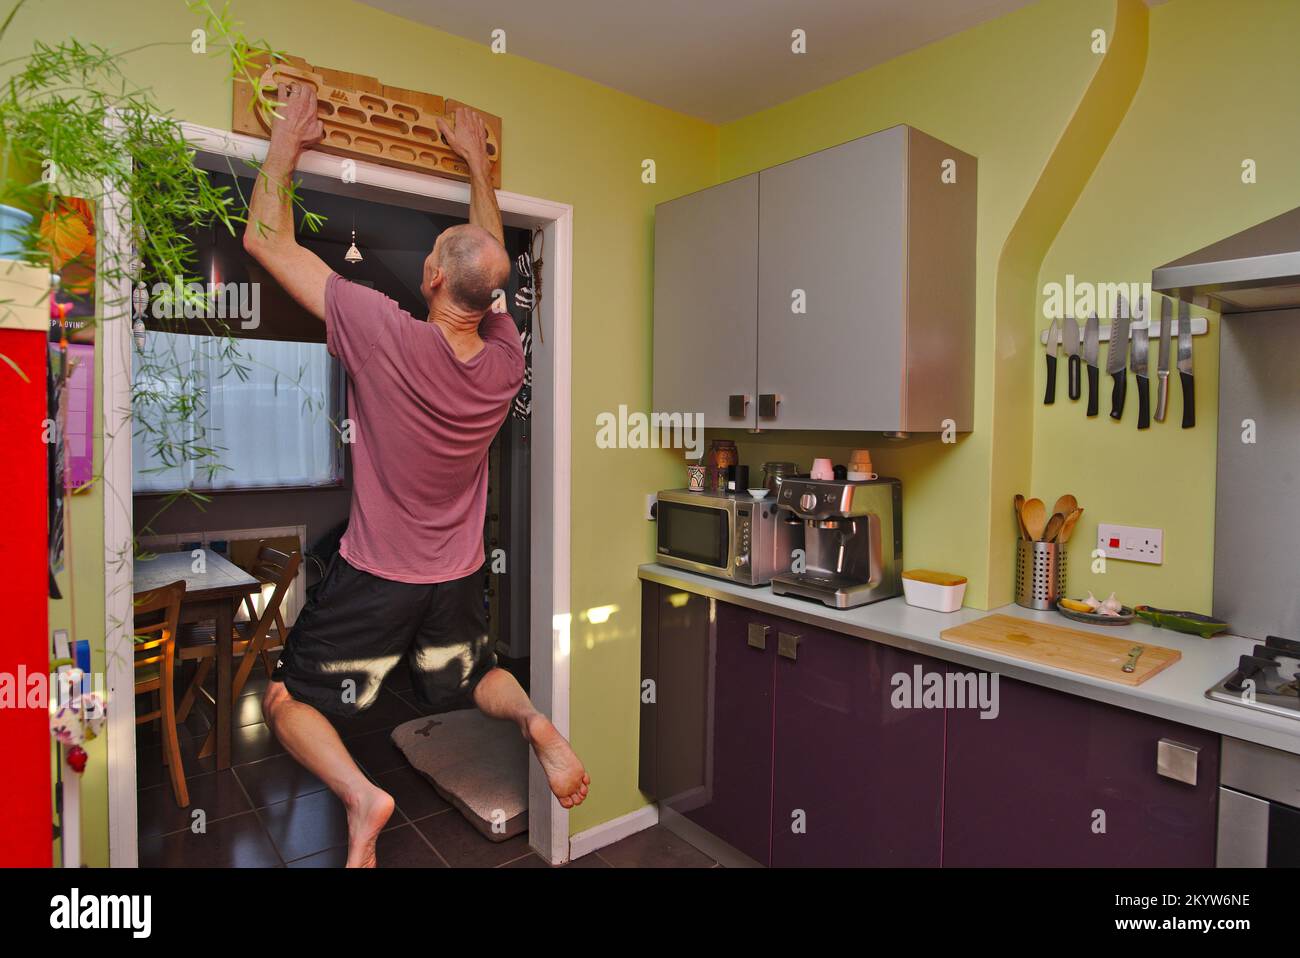 Man strength training at home using a fingerboard in his kitchen. Stock Photo